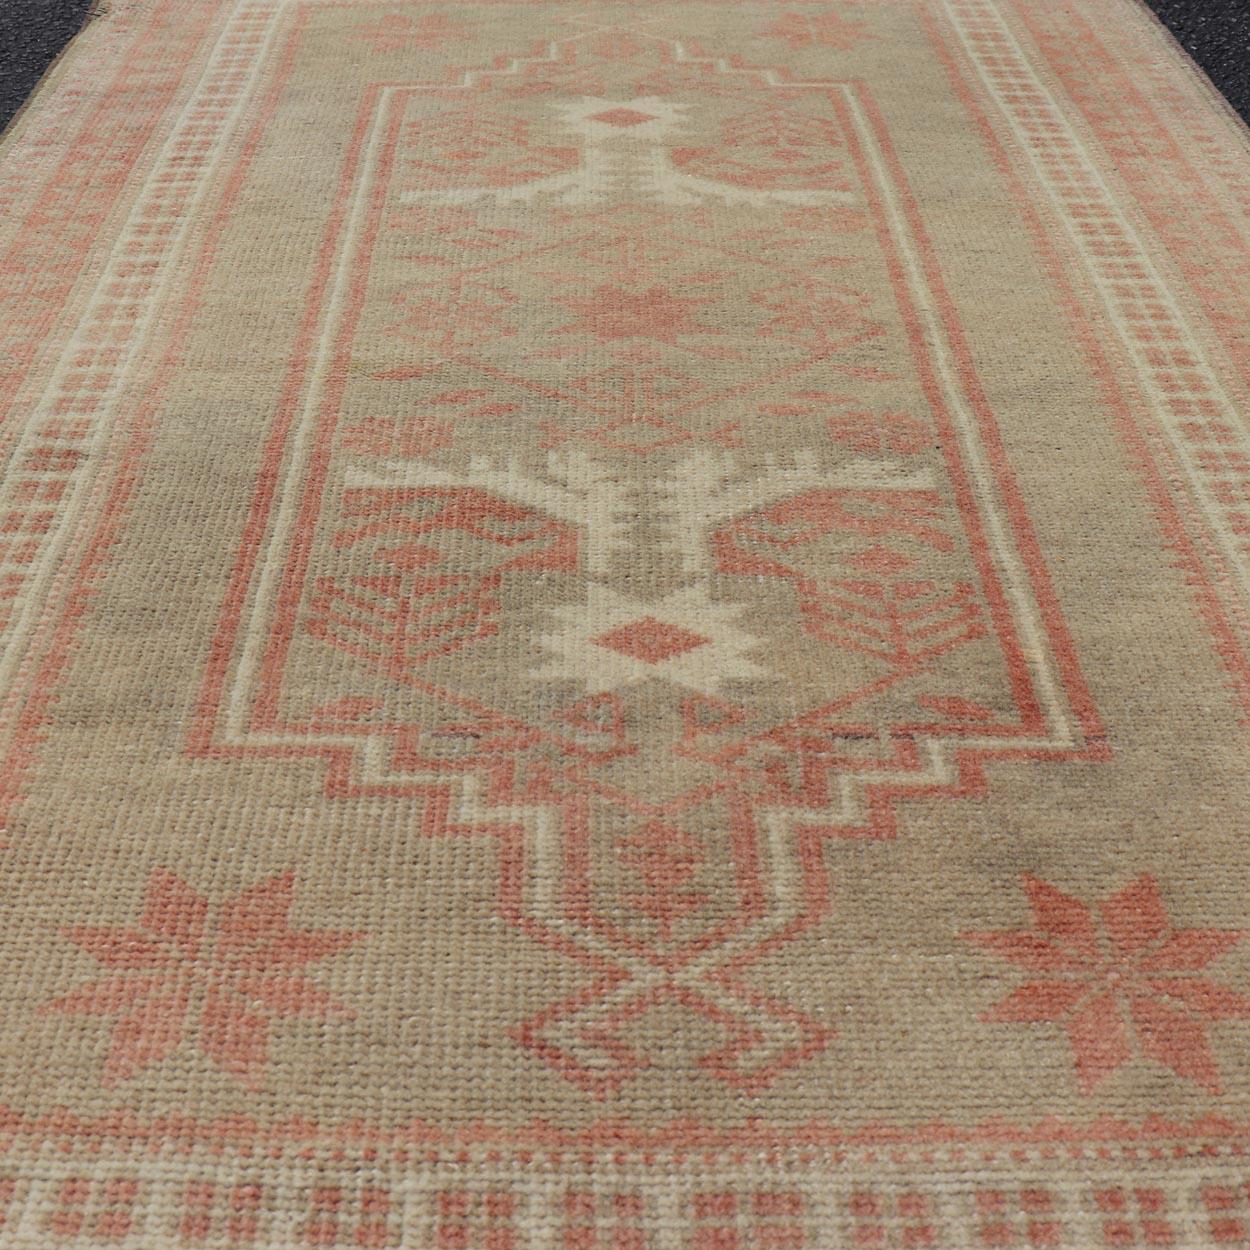 Wool Vintage Turkish Oushak Rug with Geometric Design in Soft Red, and Light Green  For Sale